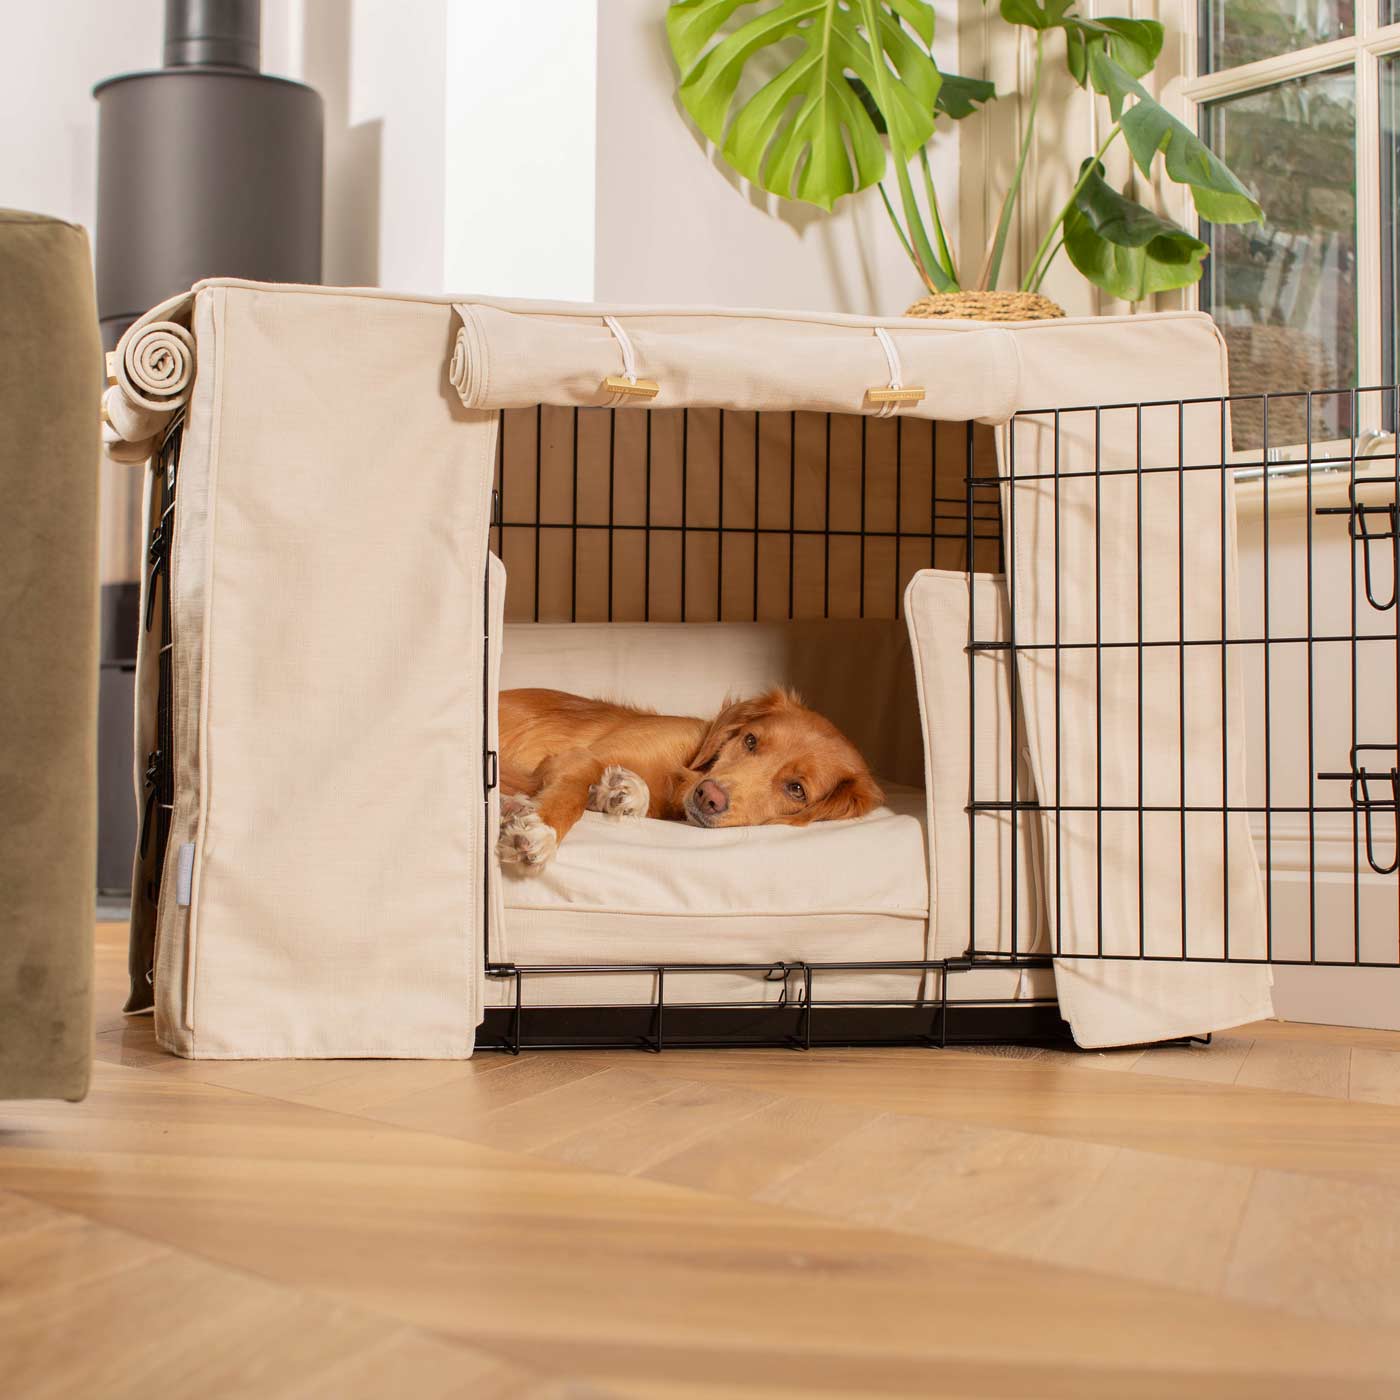 Luxury Heavy Duty Dog Crate, In Stunning Savanna Bone Crate Set, The Perfect Dog Crate Set For Building The Ultimate Pet Den! Dog Crate Cover Available To Personalise at Lords & Labradors